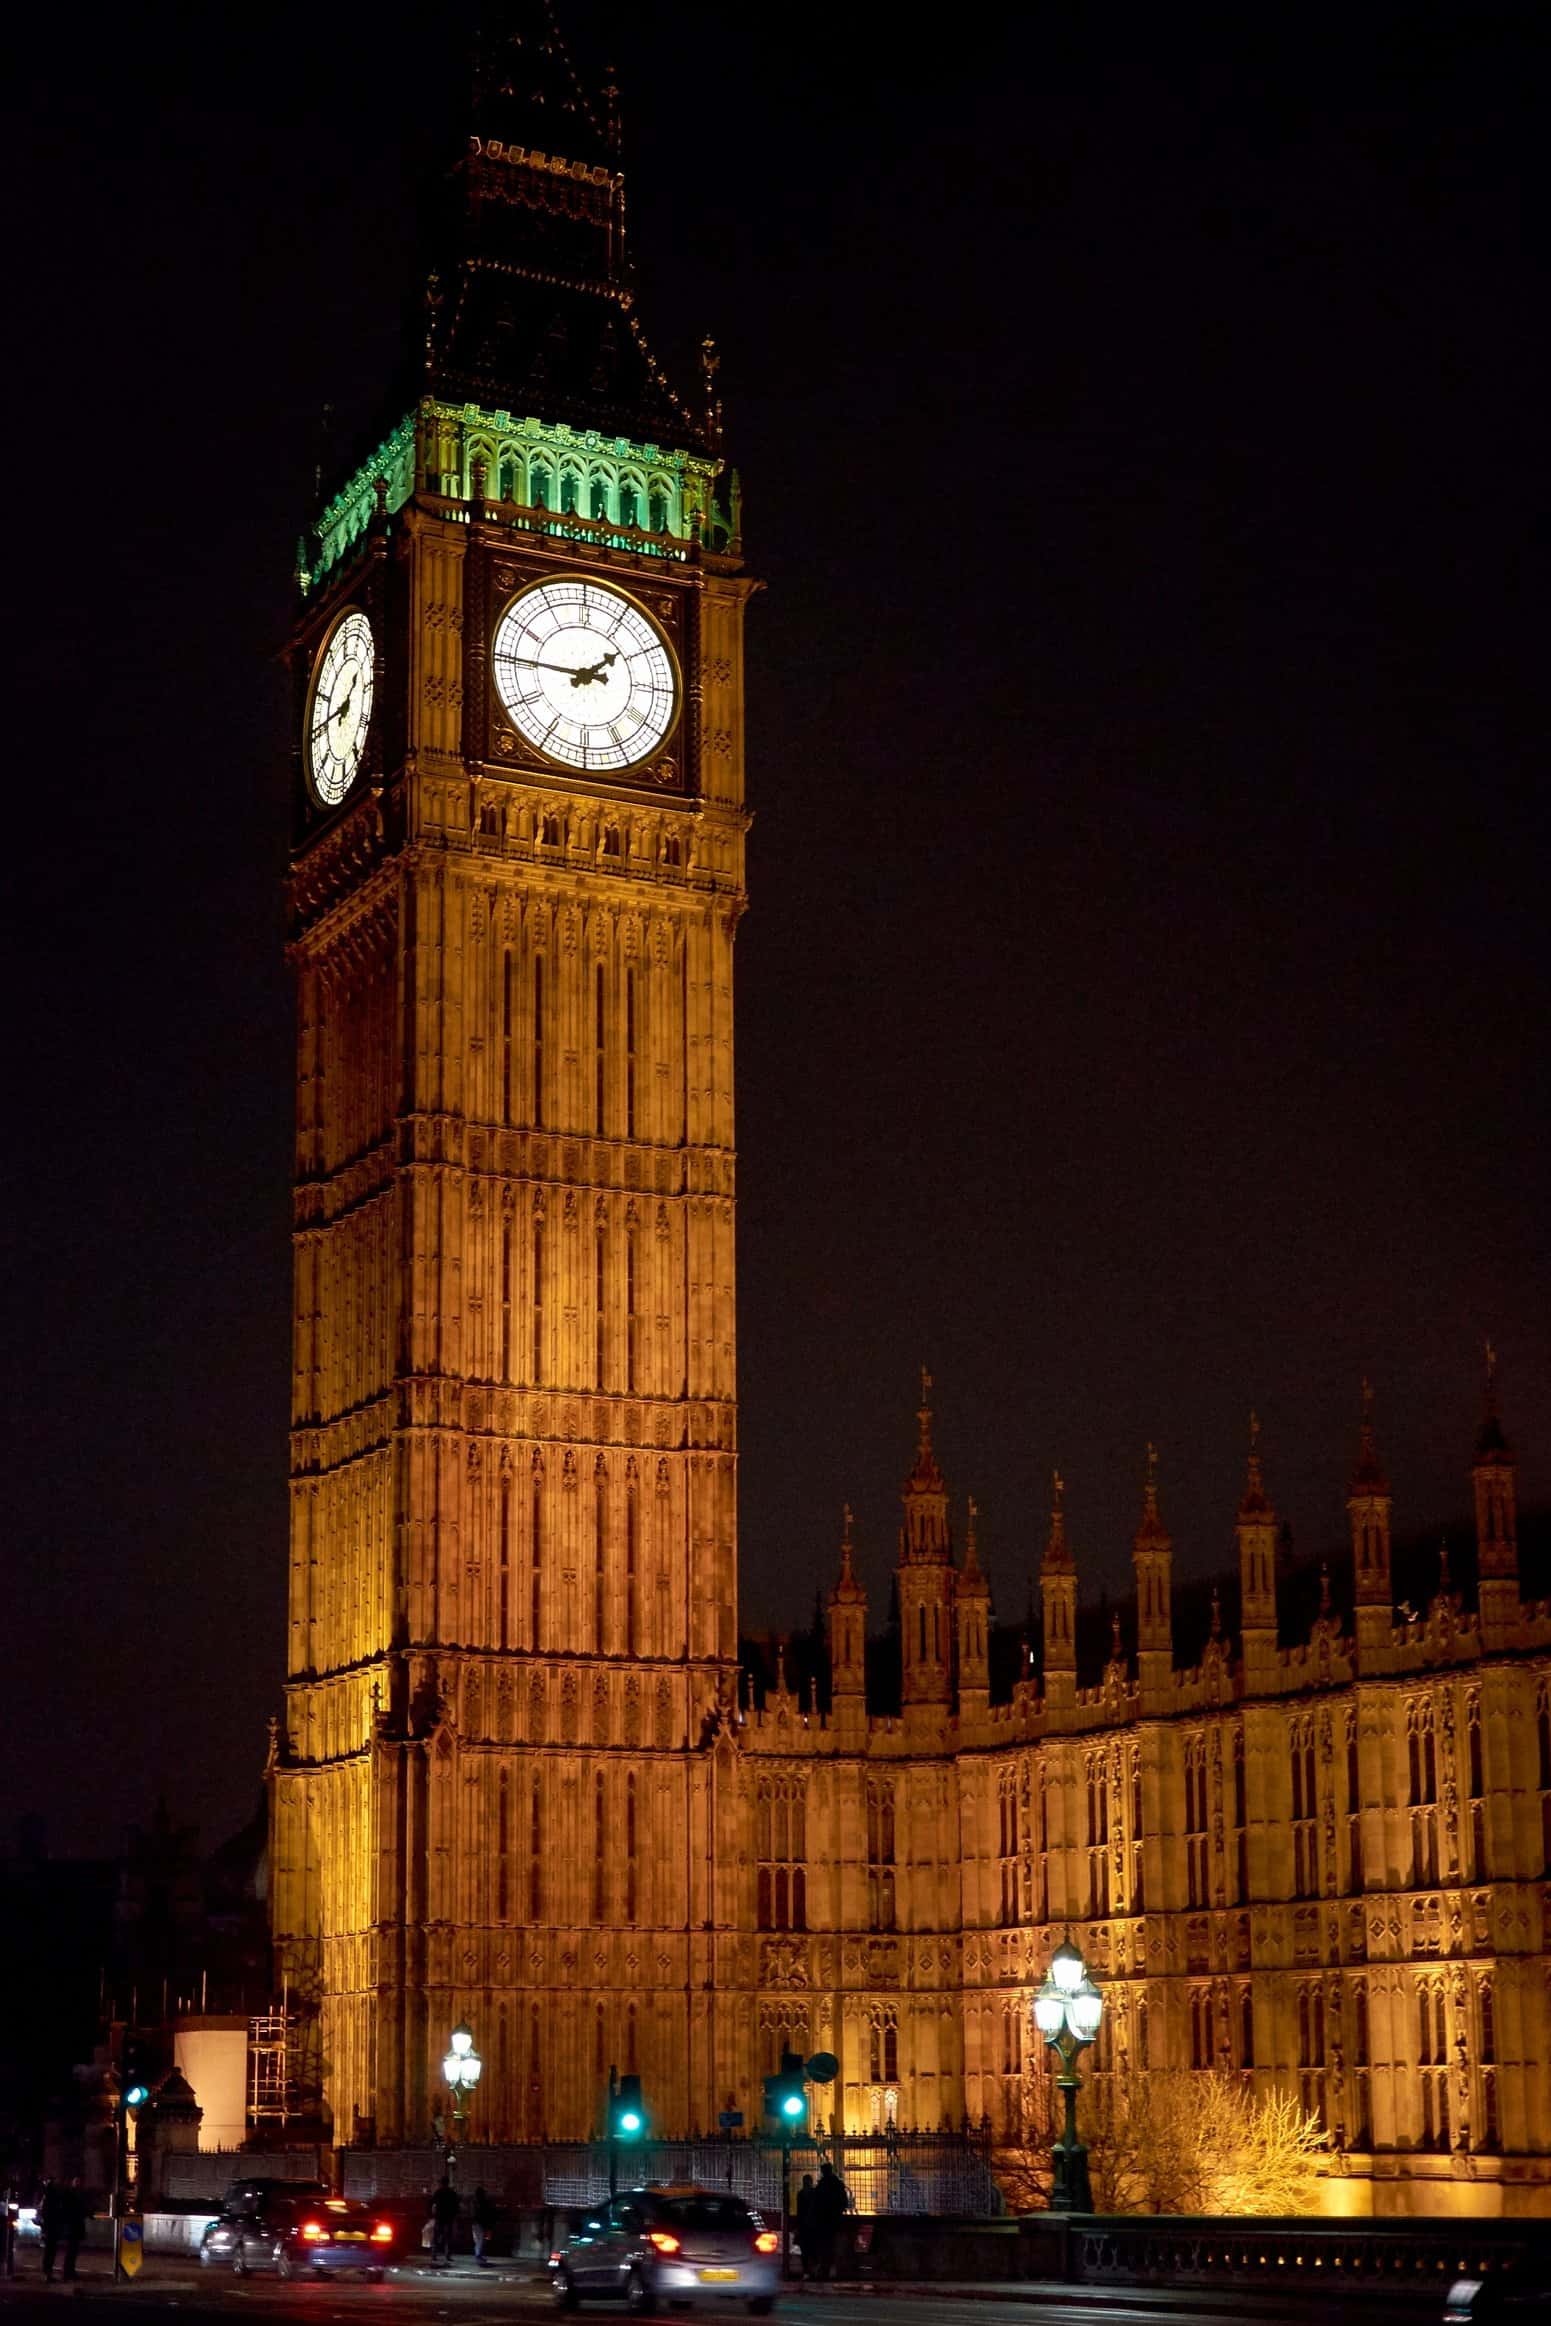 Free picture: architecture, clock, tower, city, building, London ...